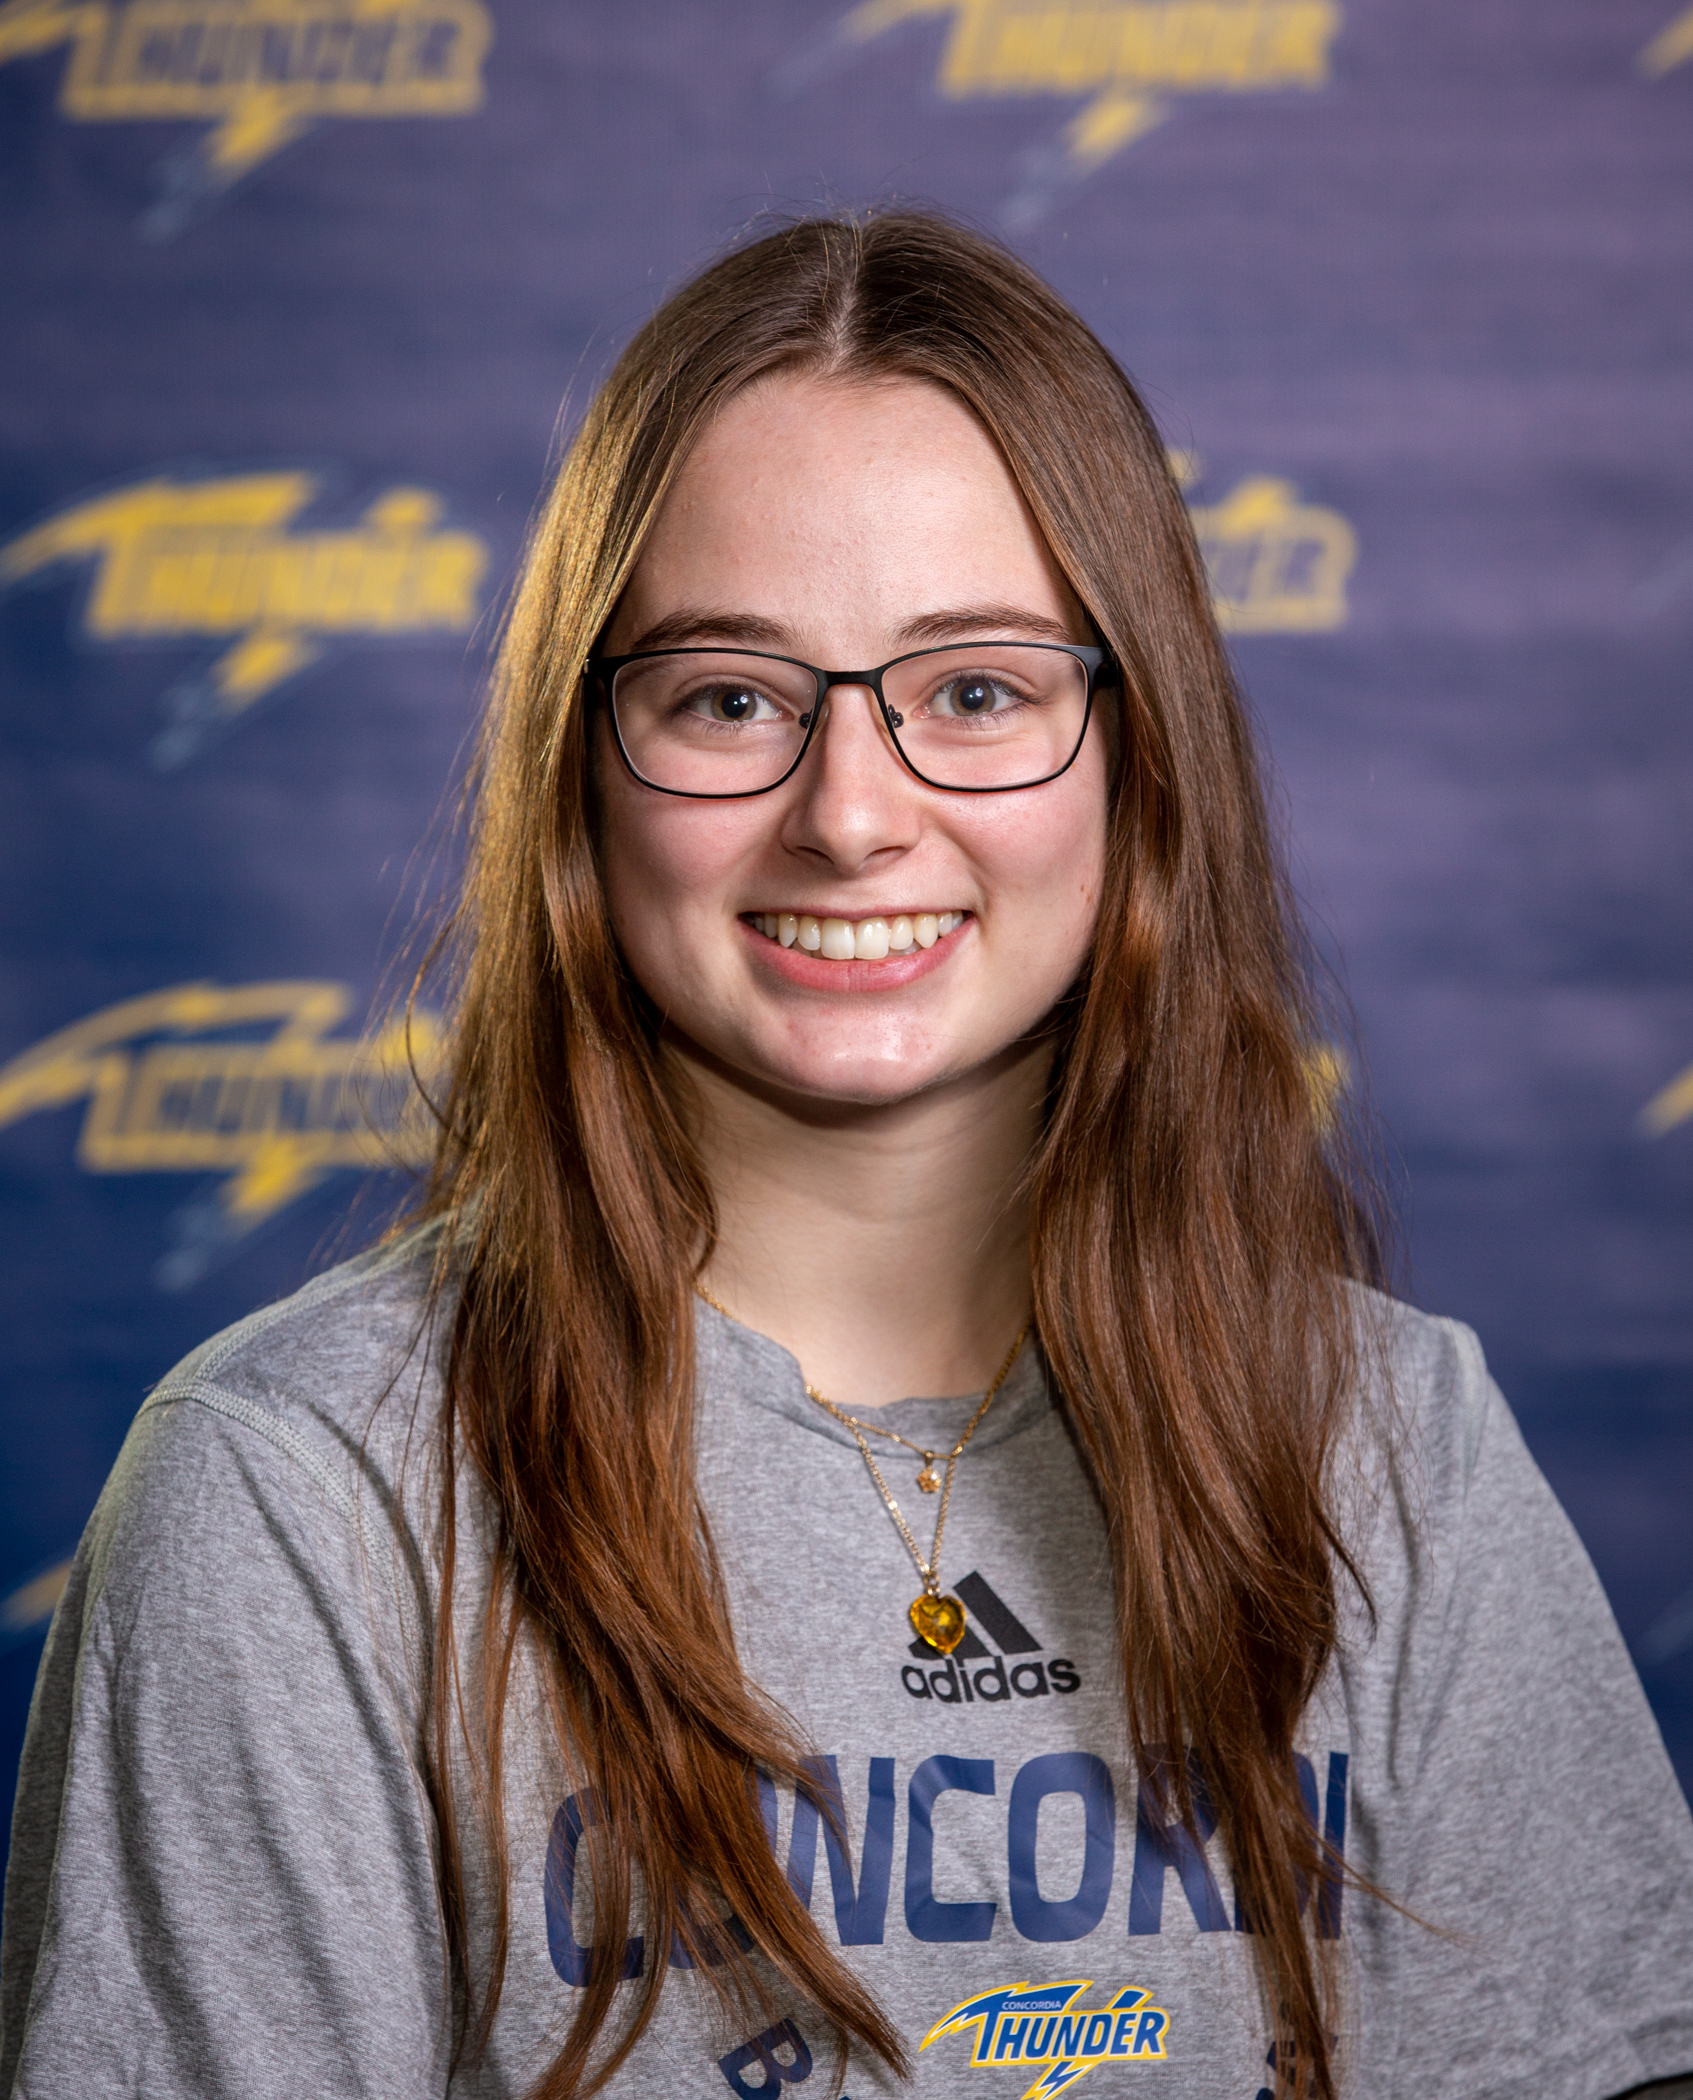 Johnna Rymes Honoured as 2021-22 ACAC Women’s Badminton Player of the Year